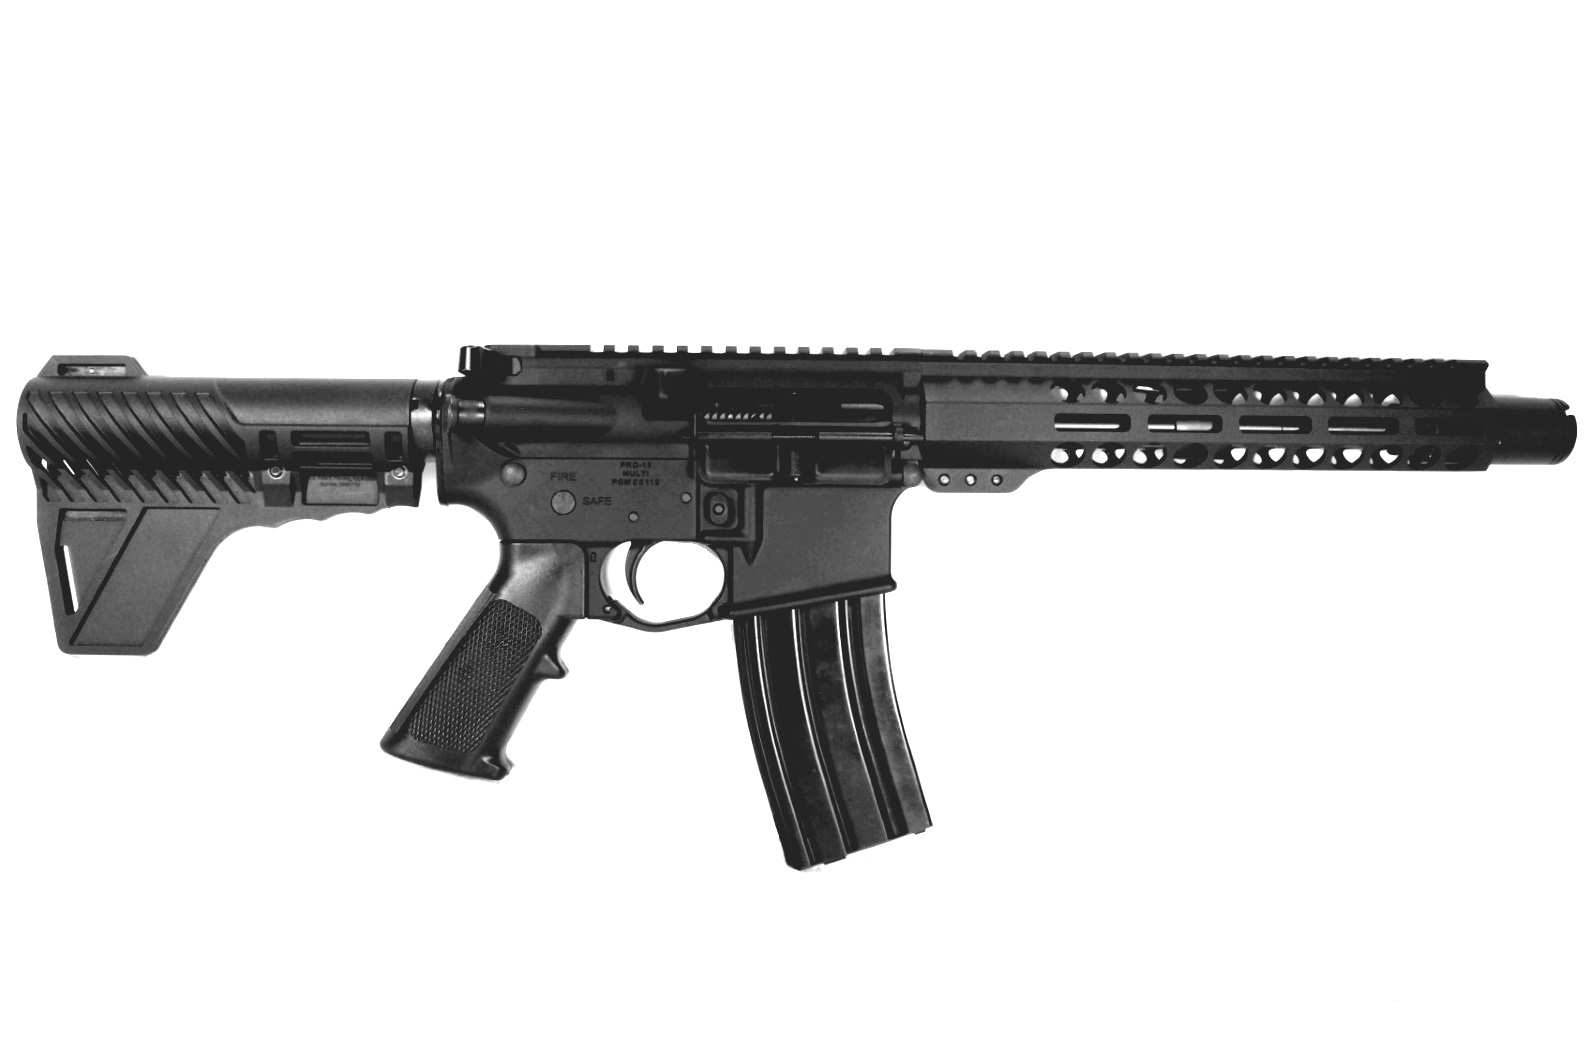 9 inch 300 Blackout AR-15 Pistol | Fast Shipping | USA MADE